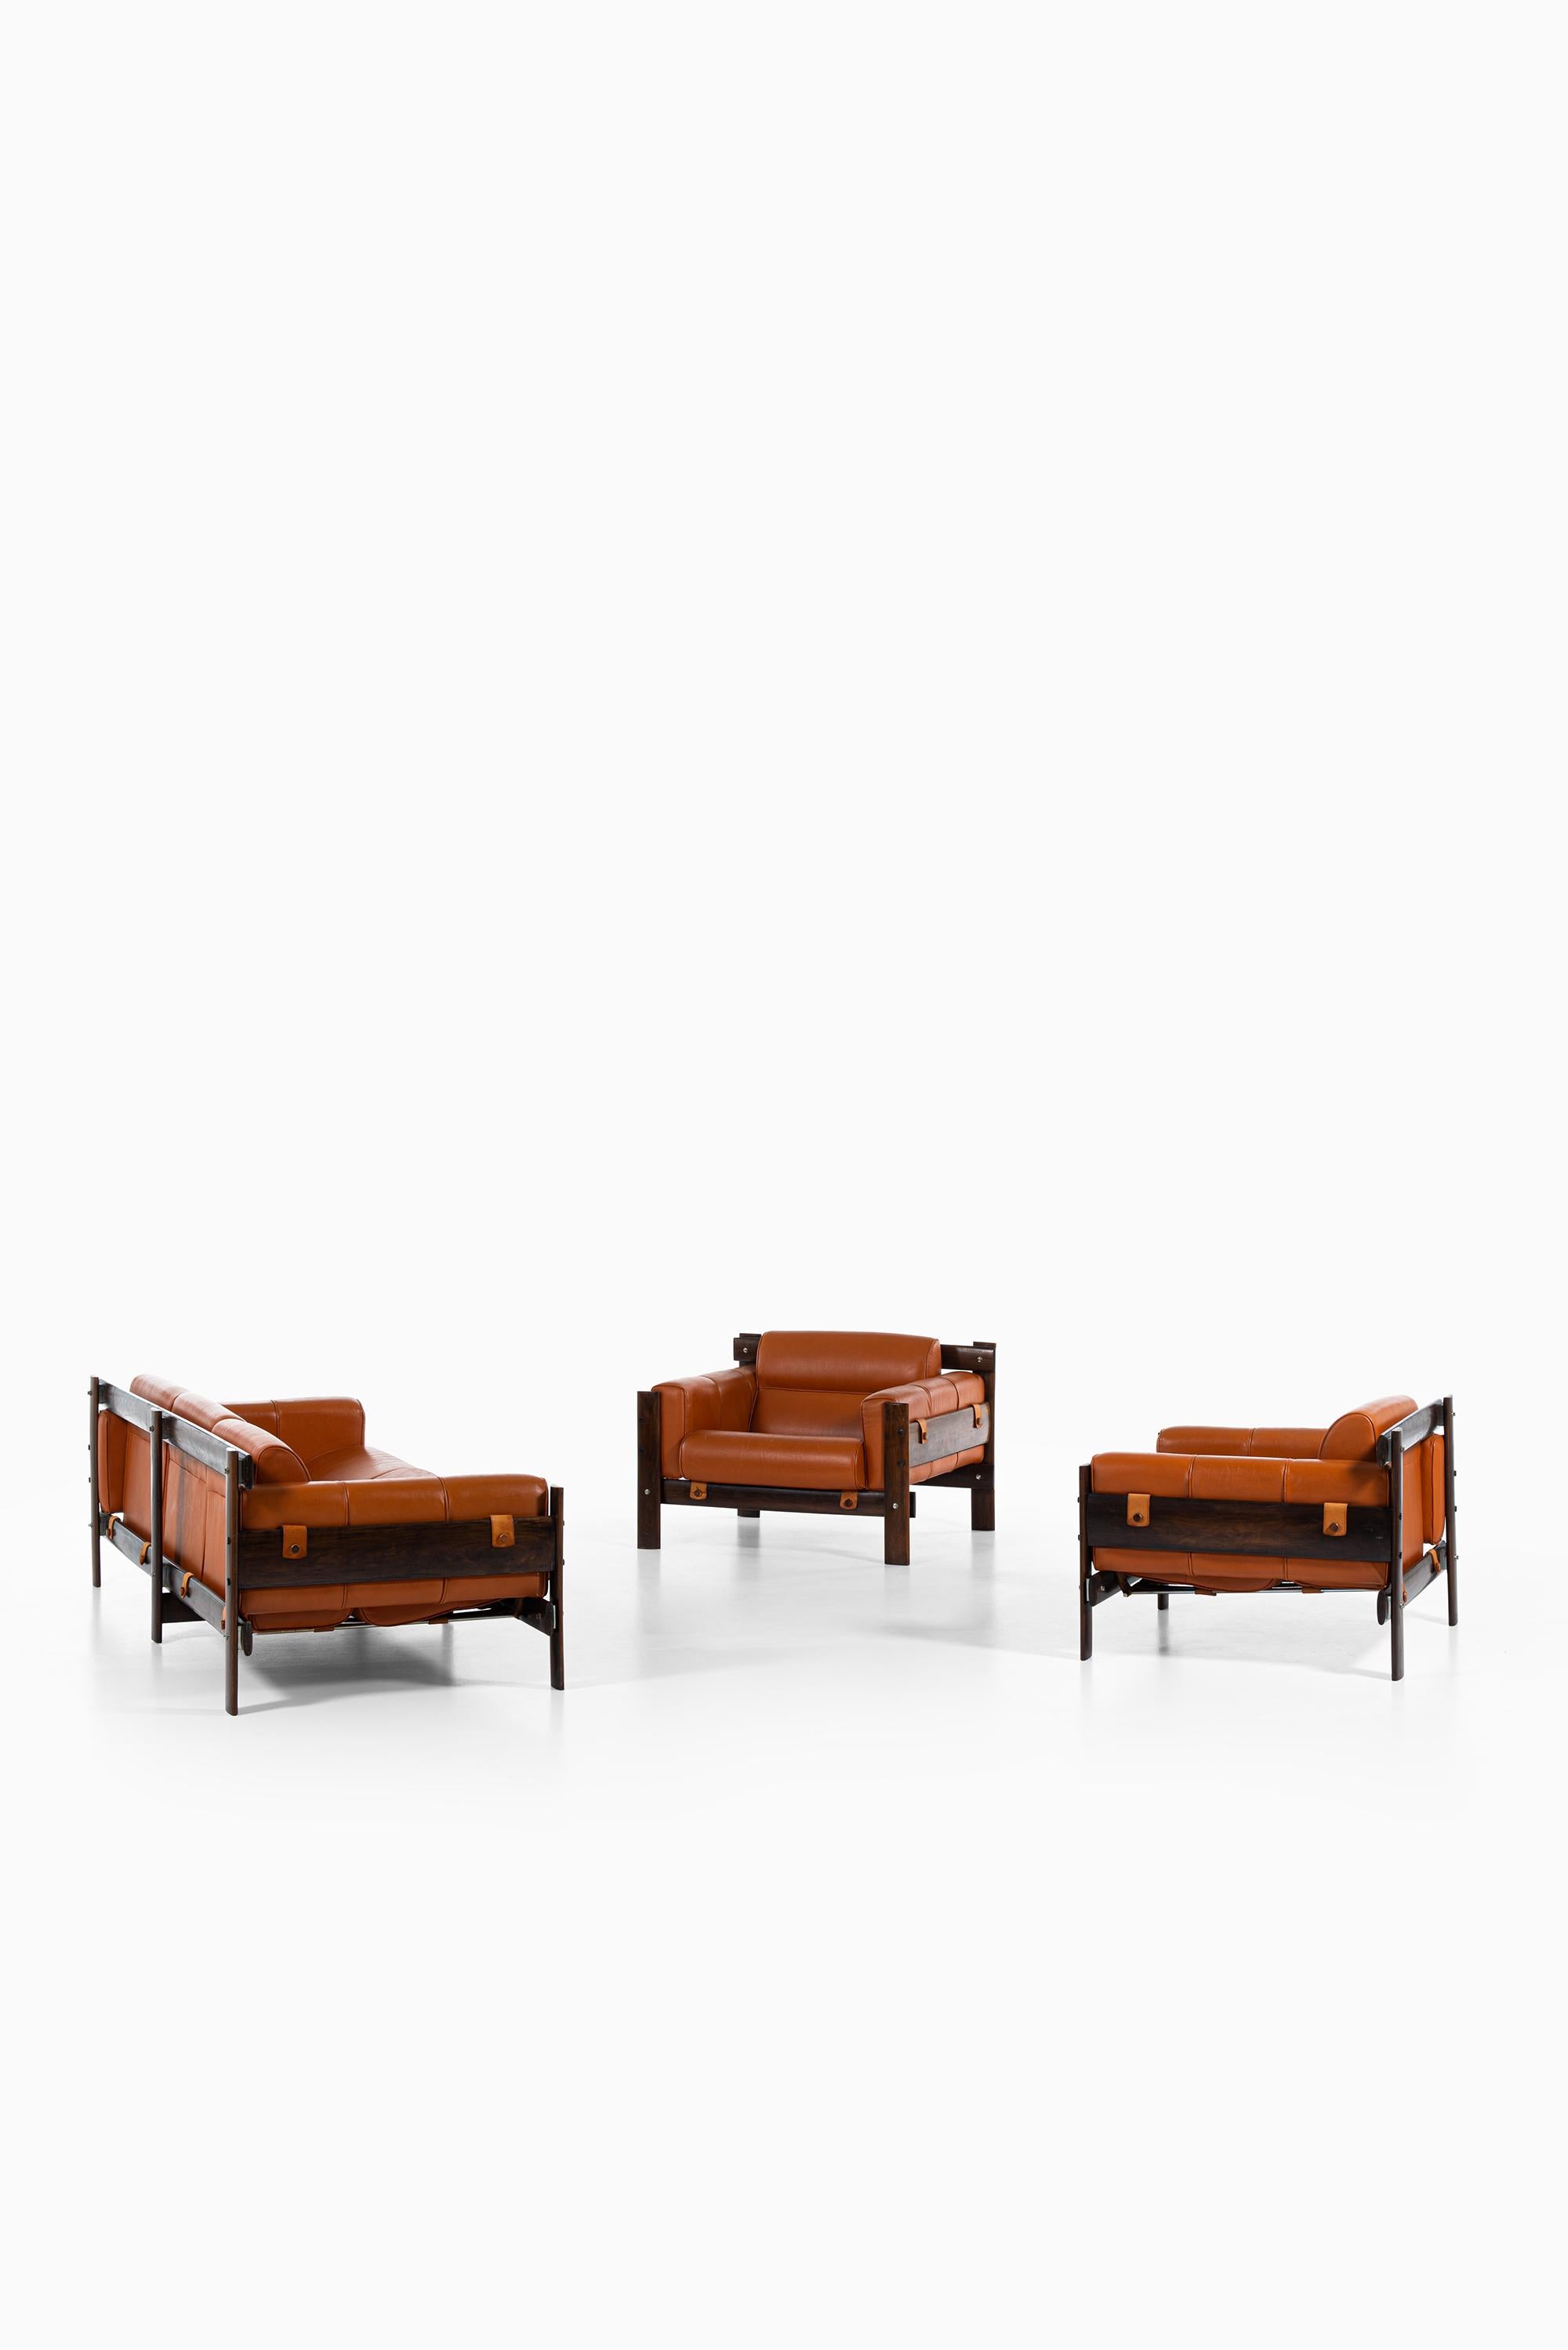 Percival Lafer Sofa in Rosewood and Leather by Lafer MP in Brazil 3